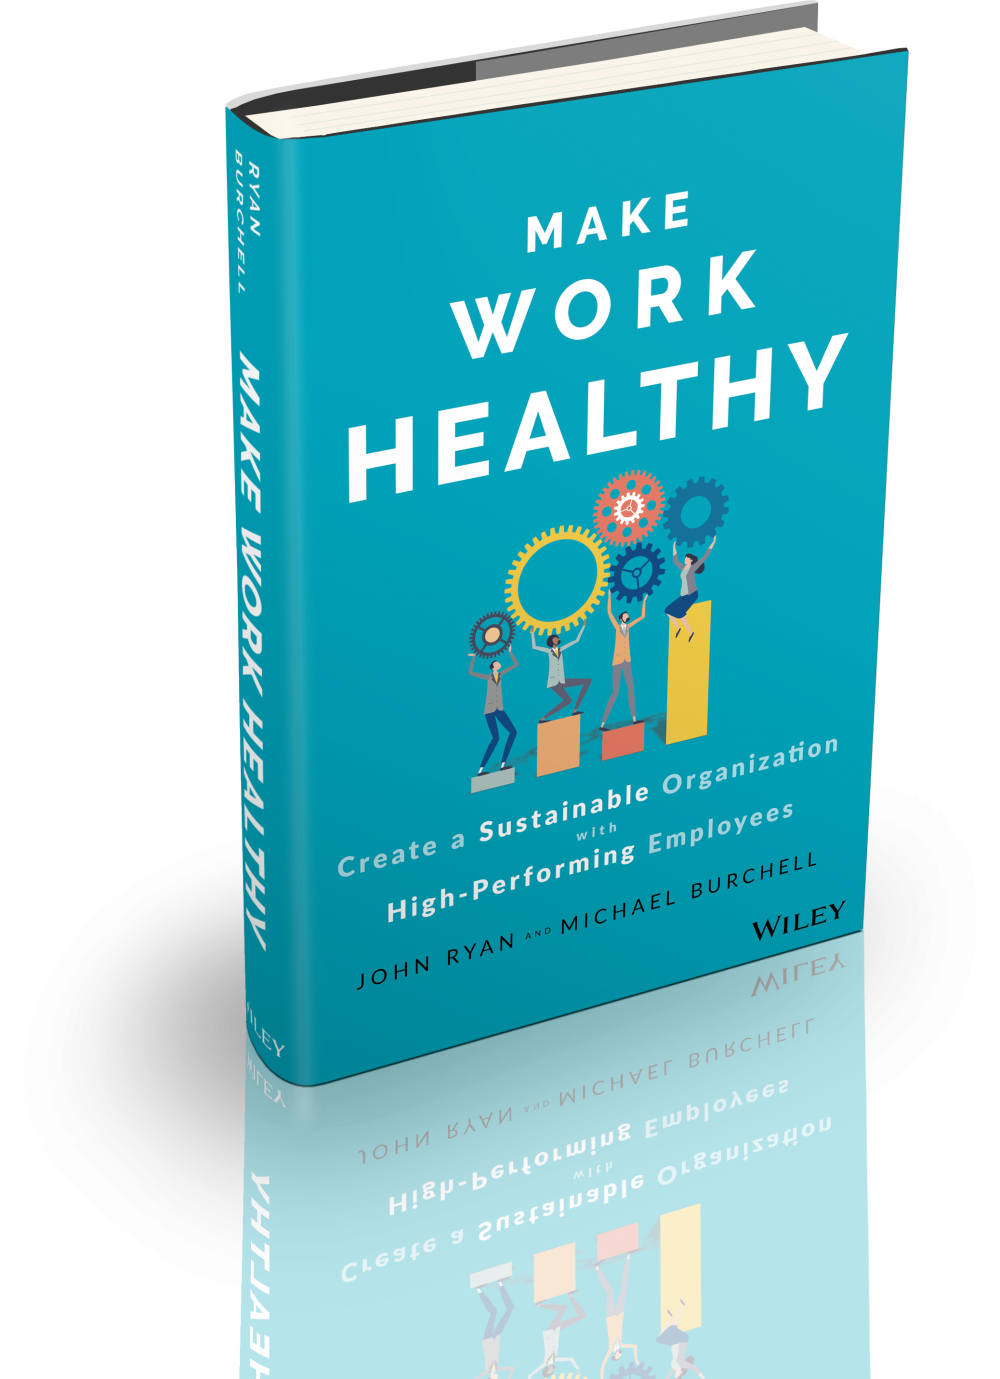 Make Work Healthy - one of the best management books